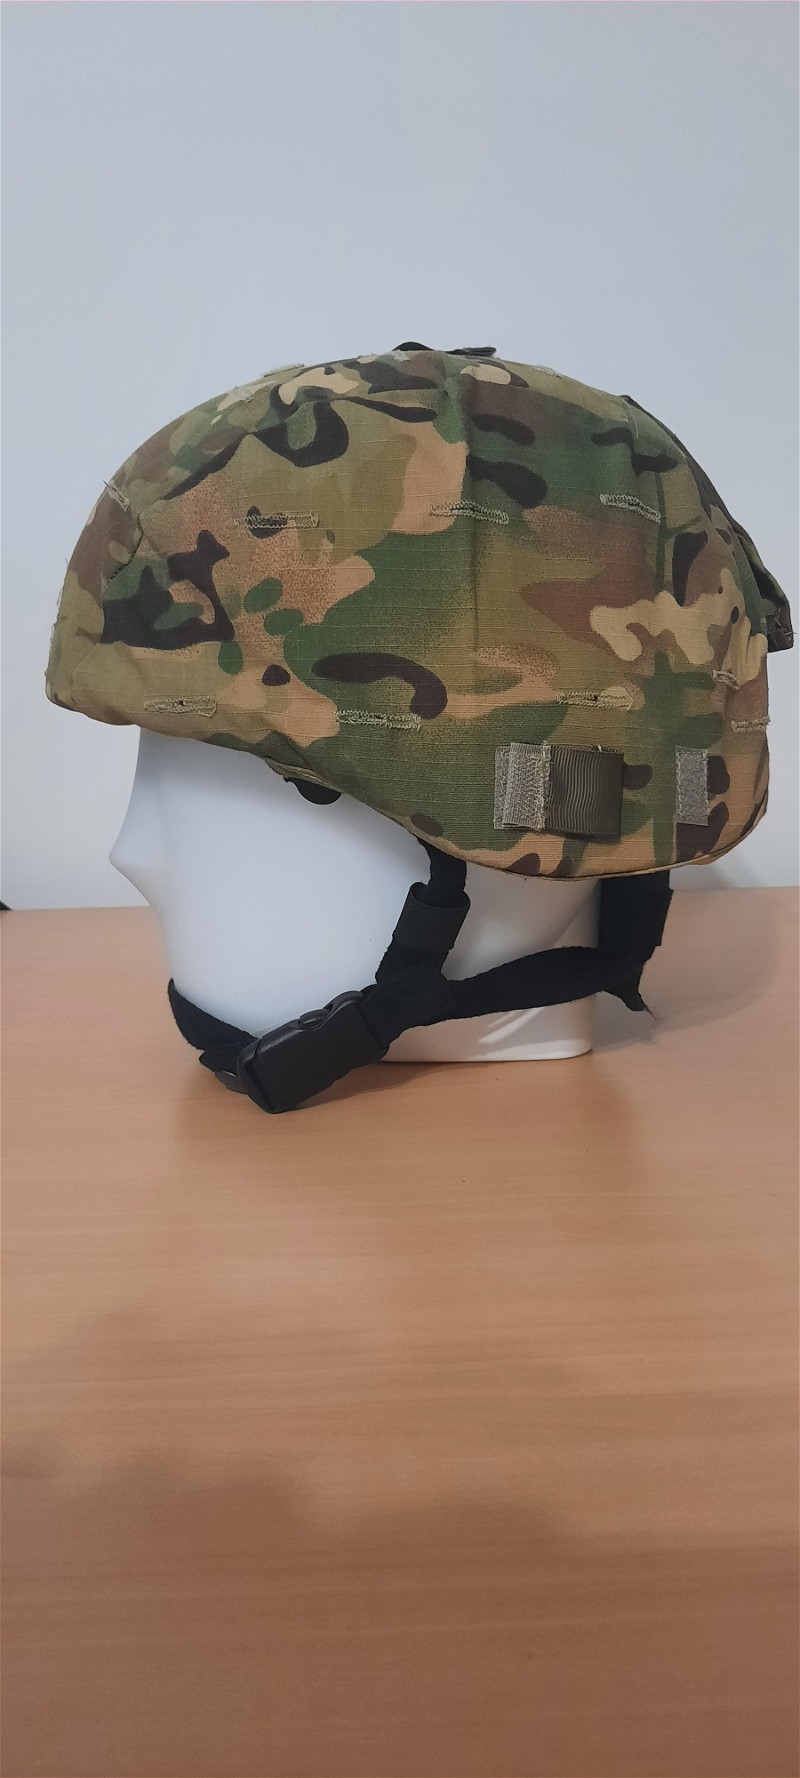 Image 1 for Replica MICH2000 helm met multicam cover